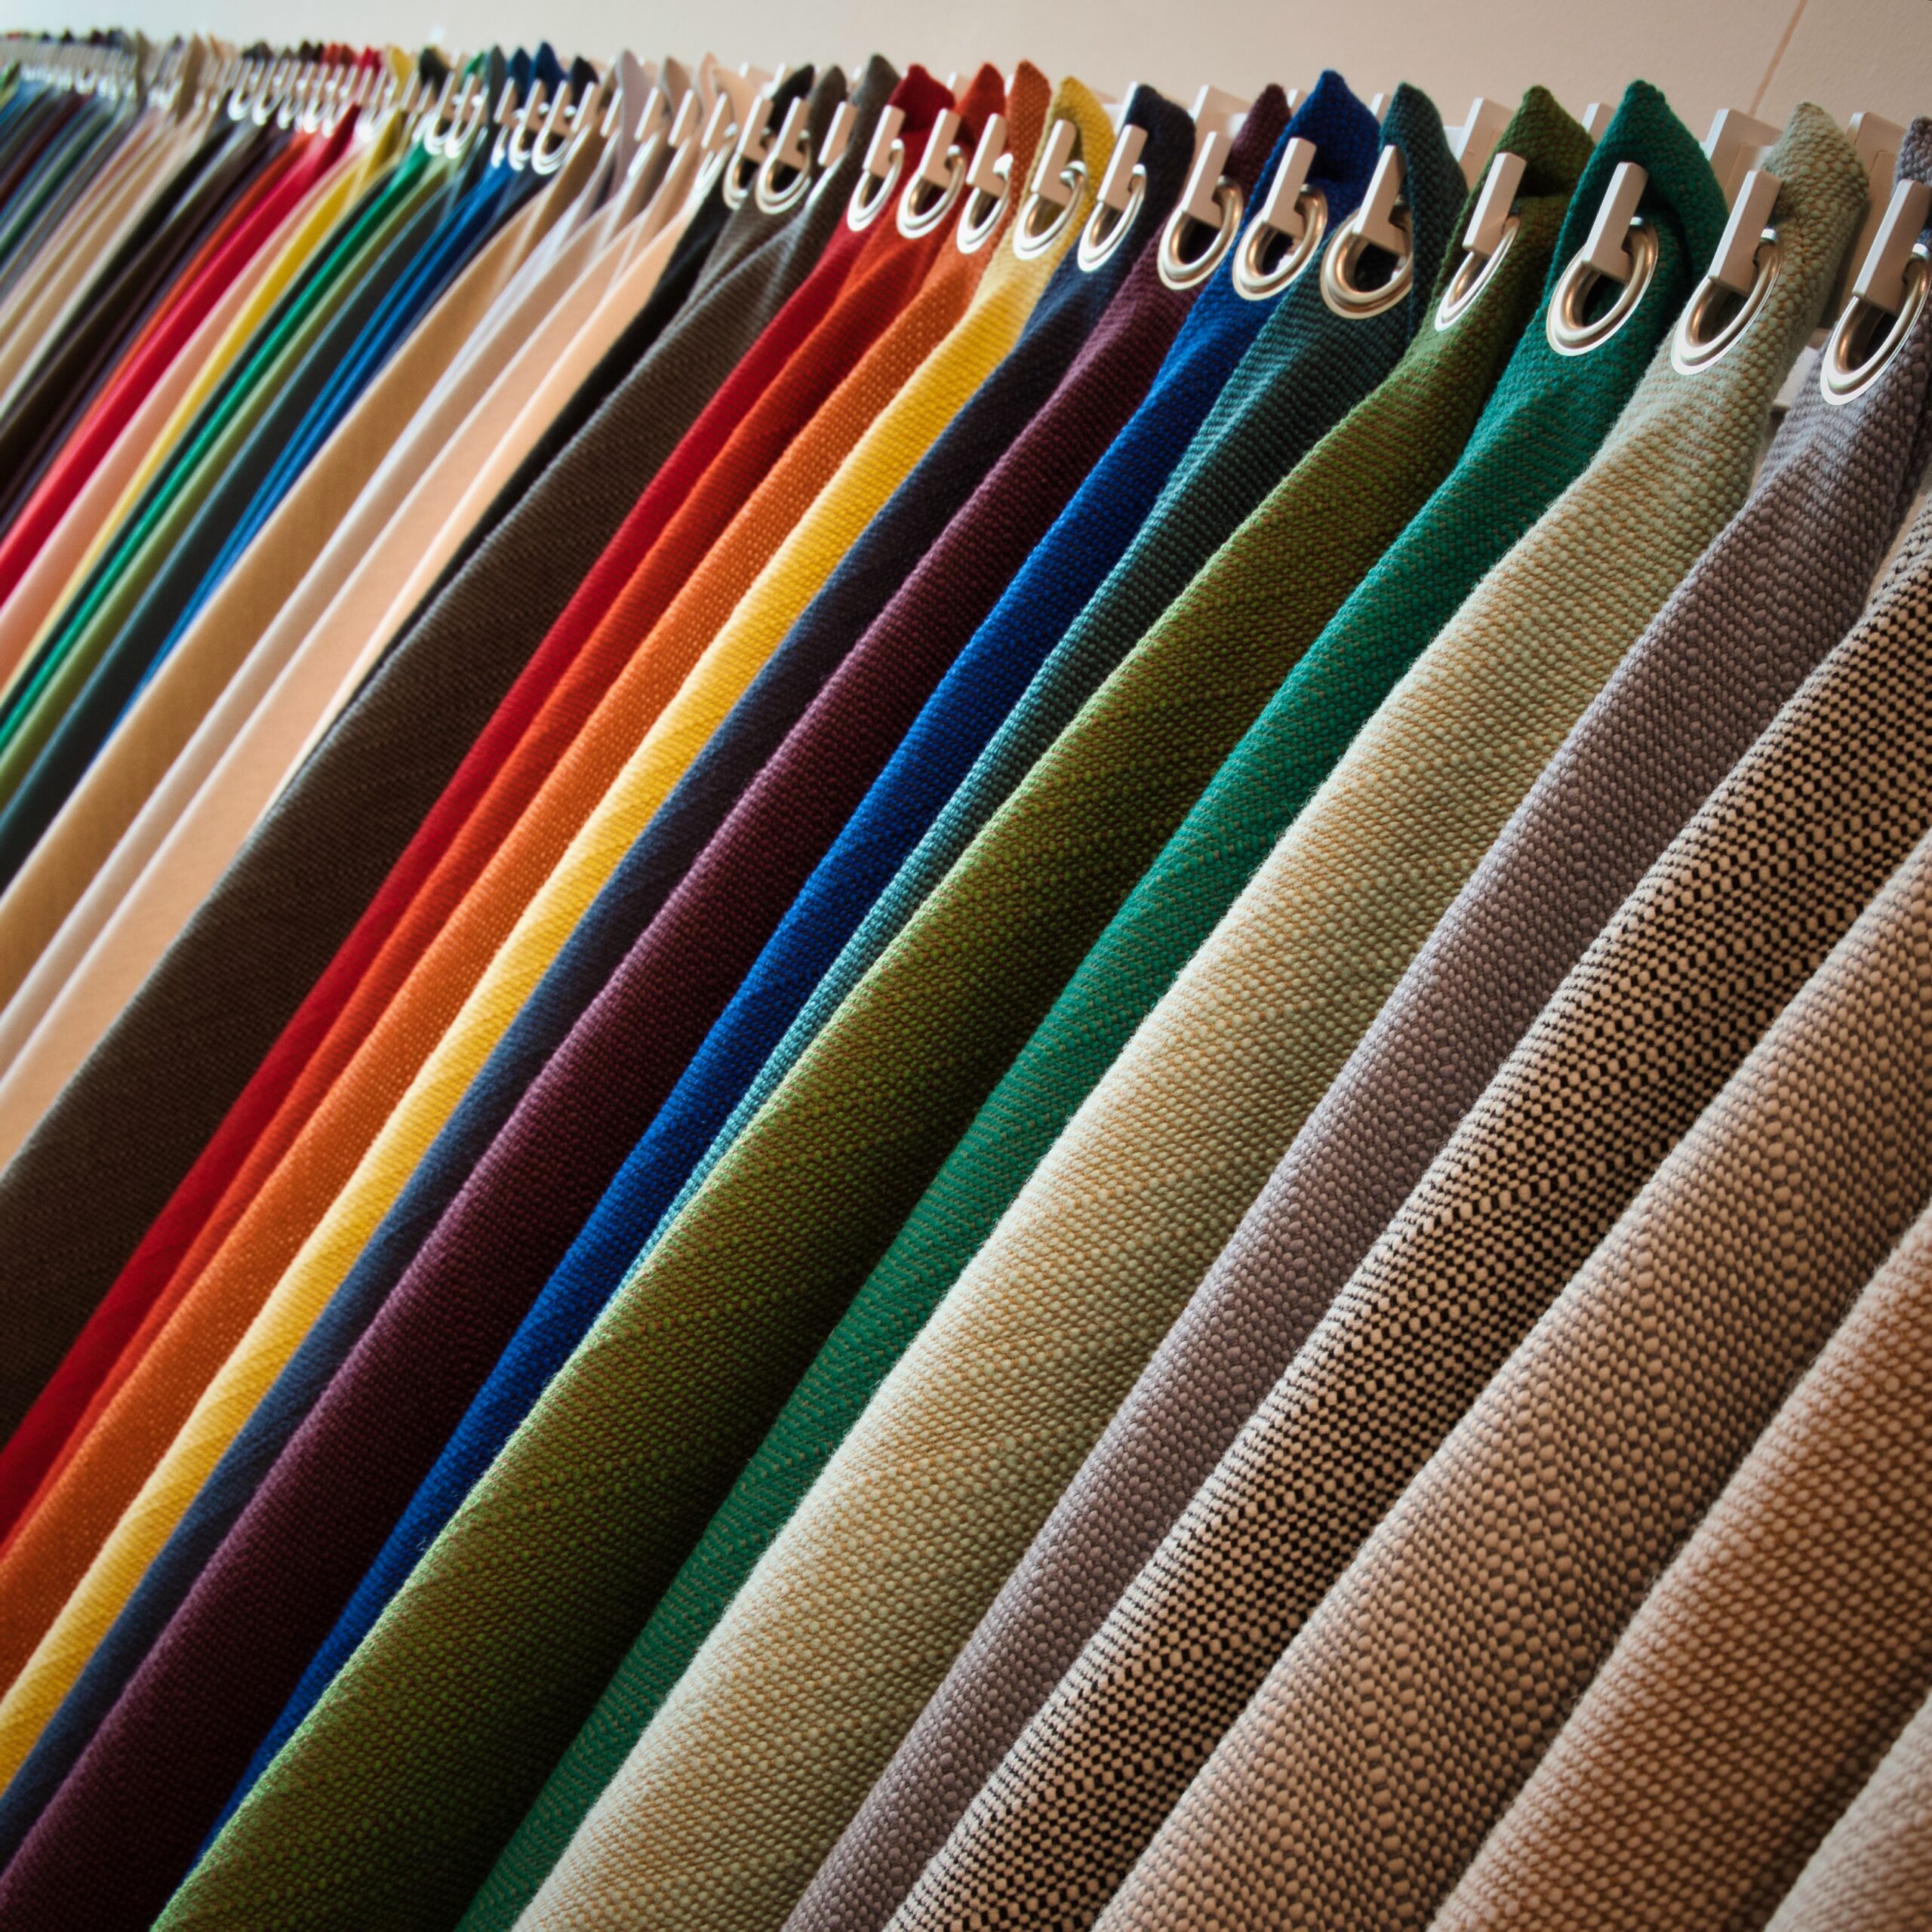 The 10 Most Common Colours For Uniforms at Workplace